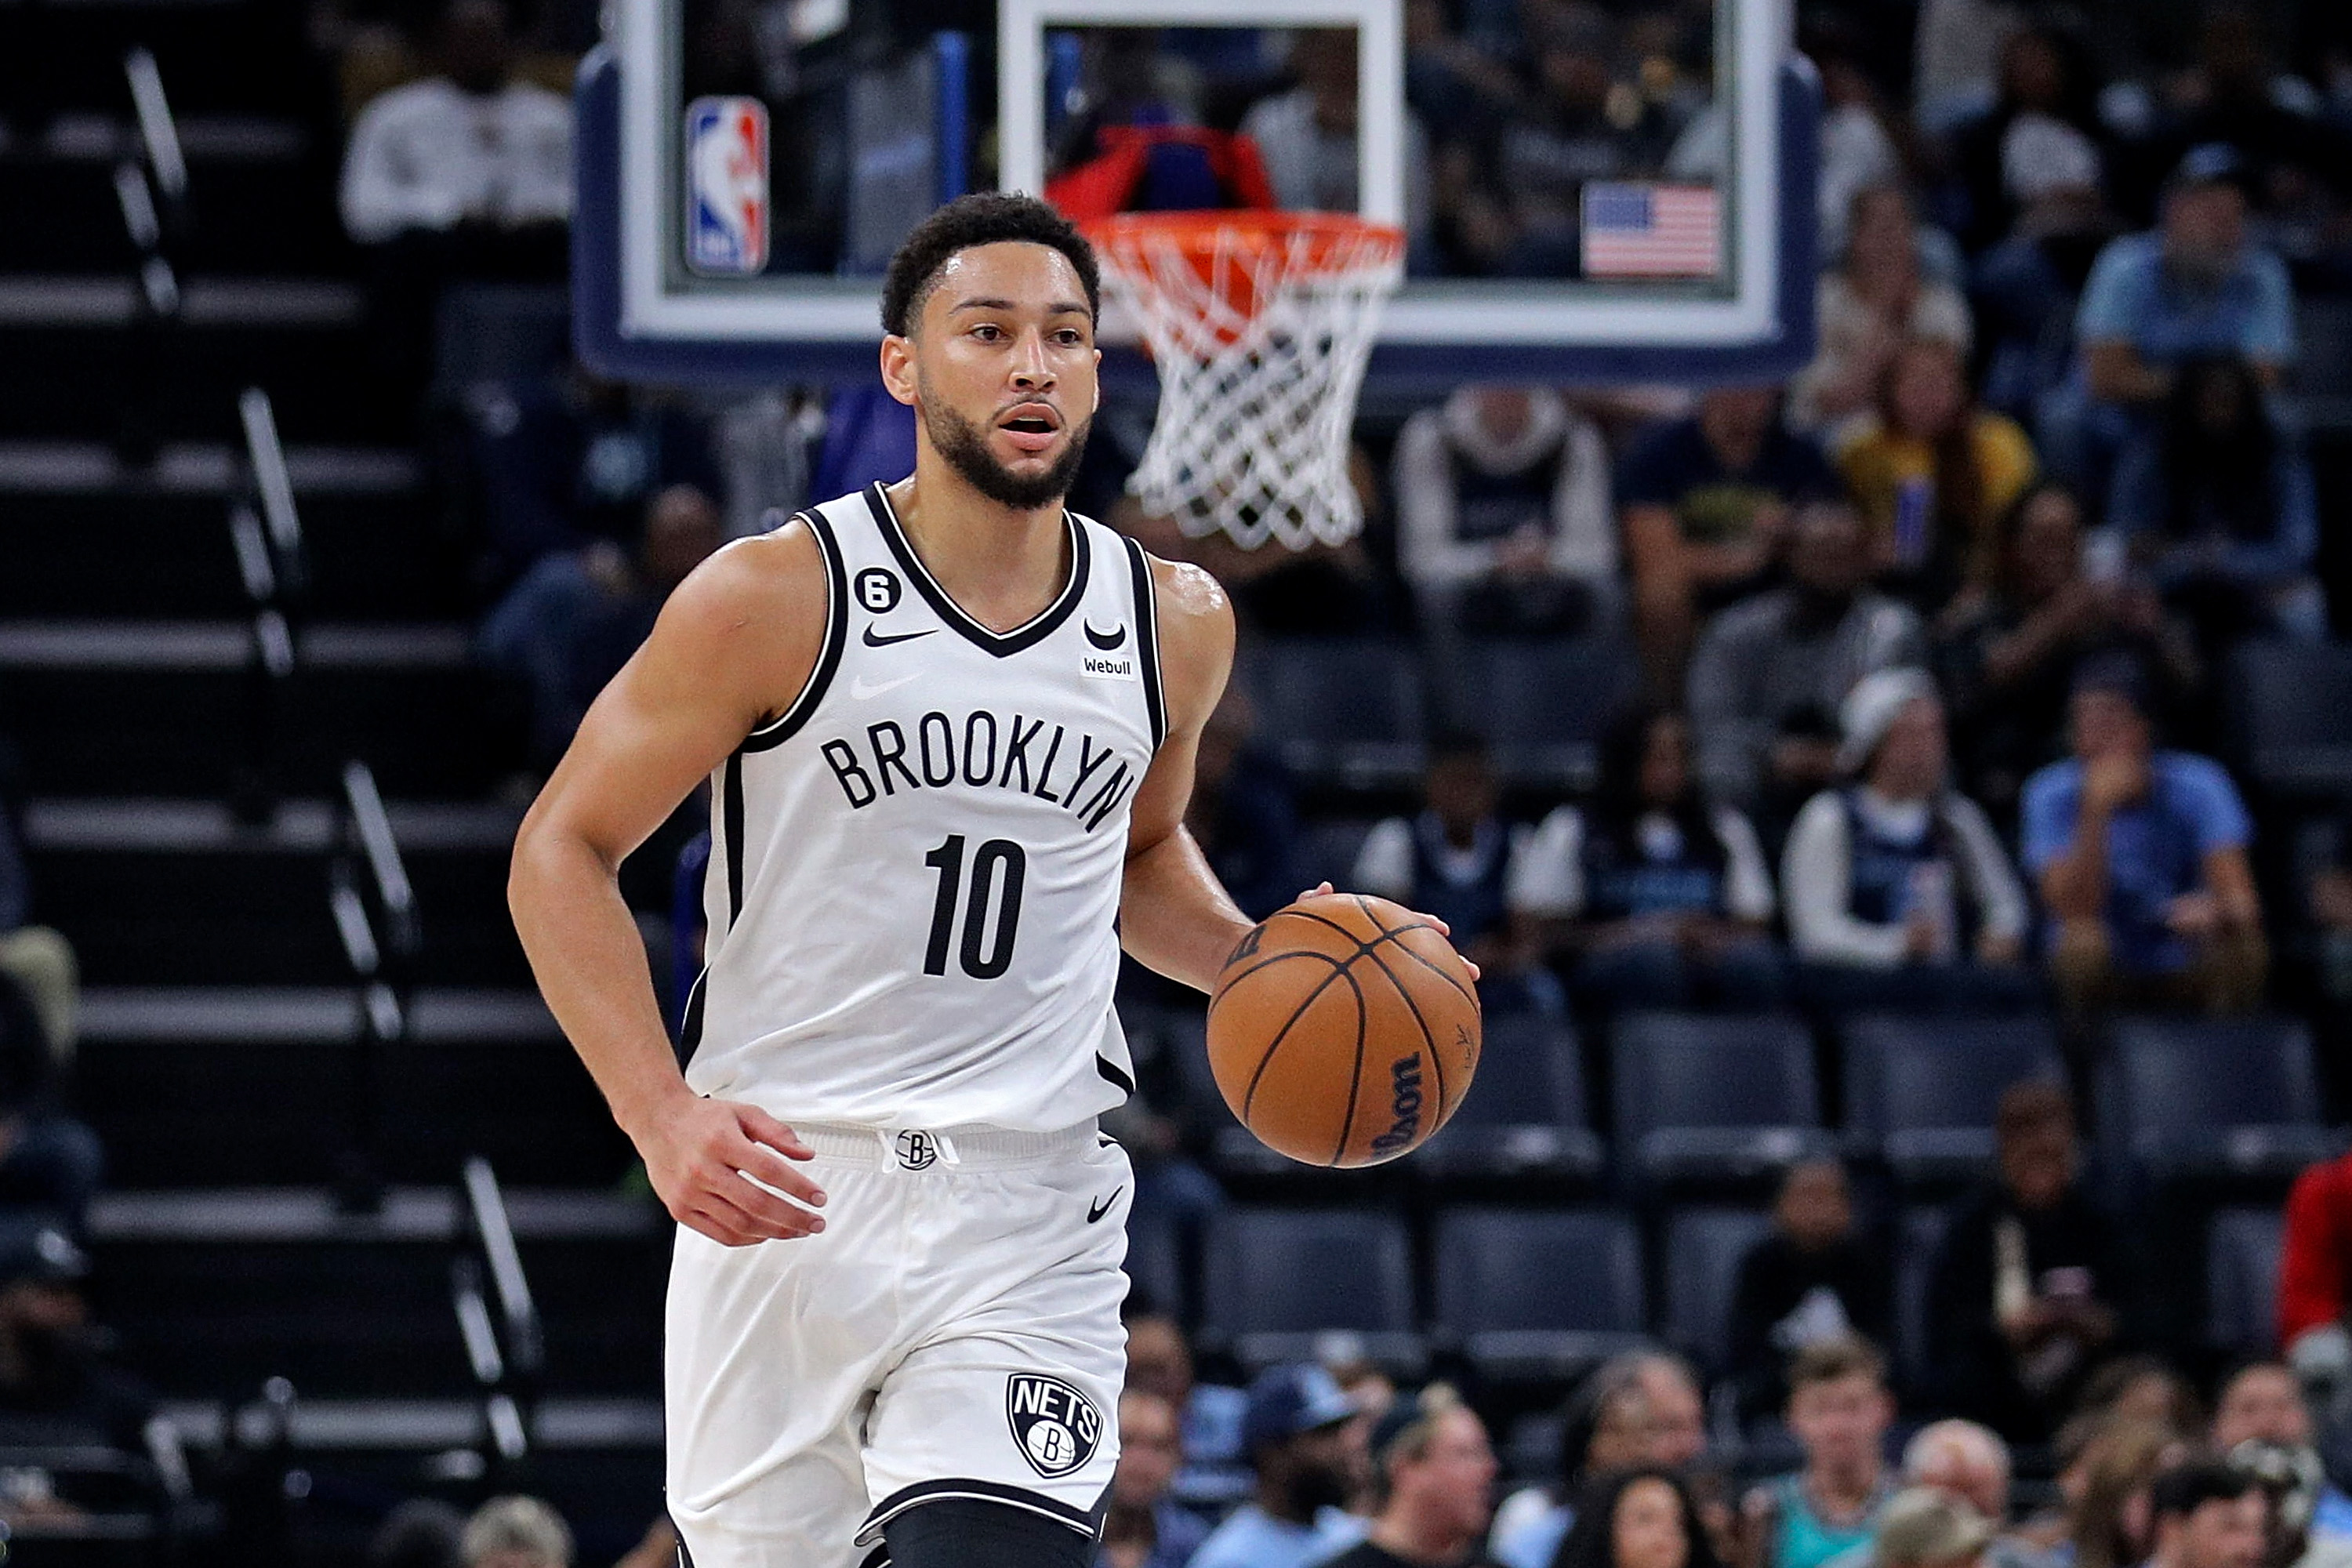 Ben Simmons takes court for Nets in first look at new Big 3